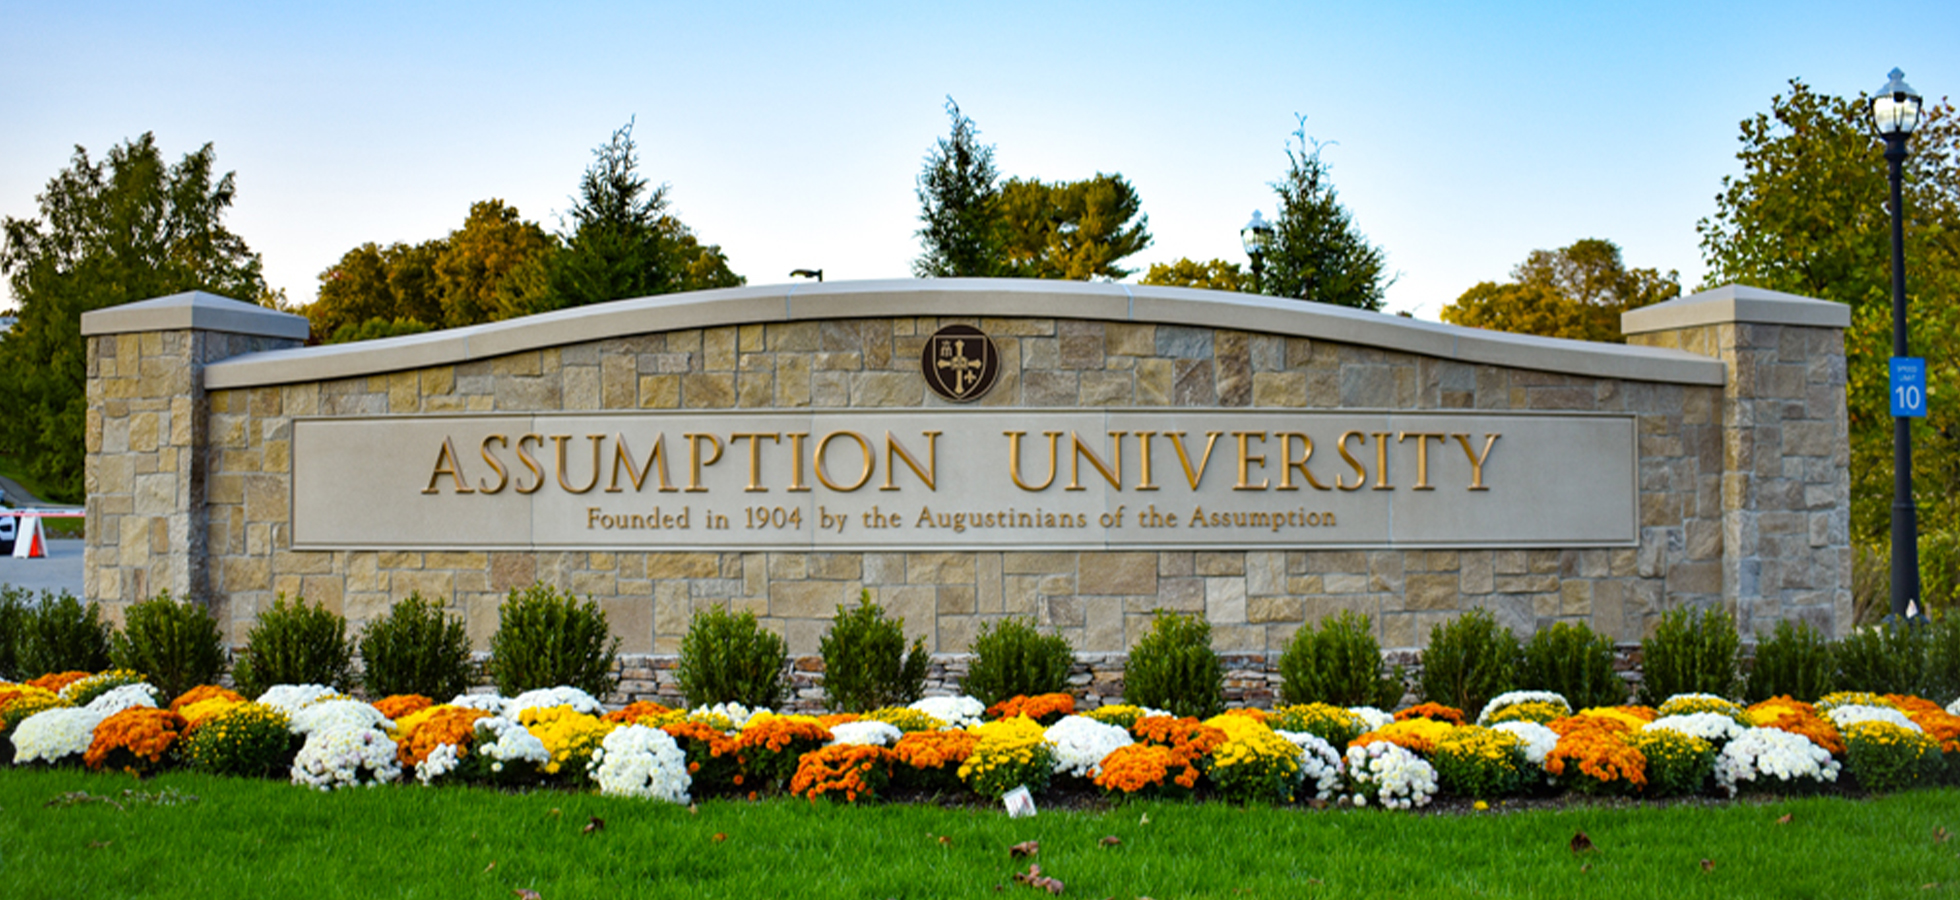 Assumption University sign at the front of campus, where a new alternative to the FAFSA was just launched